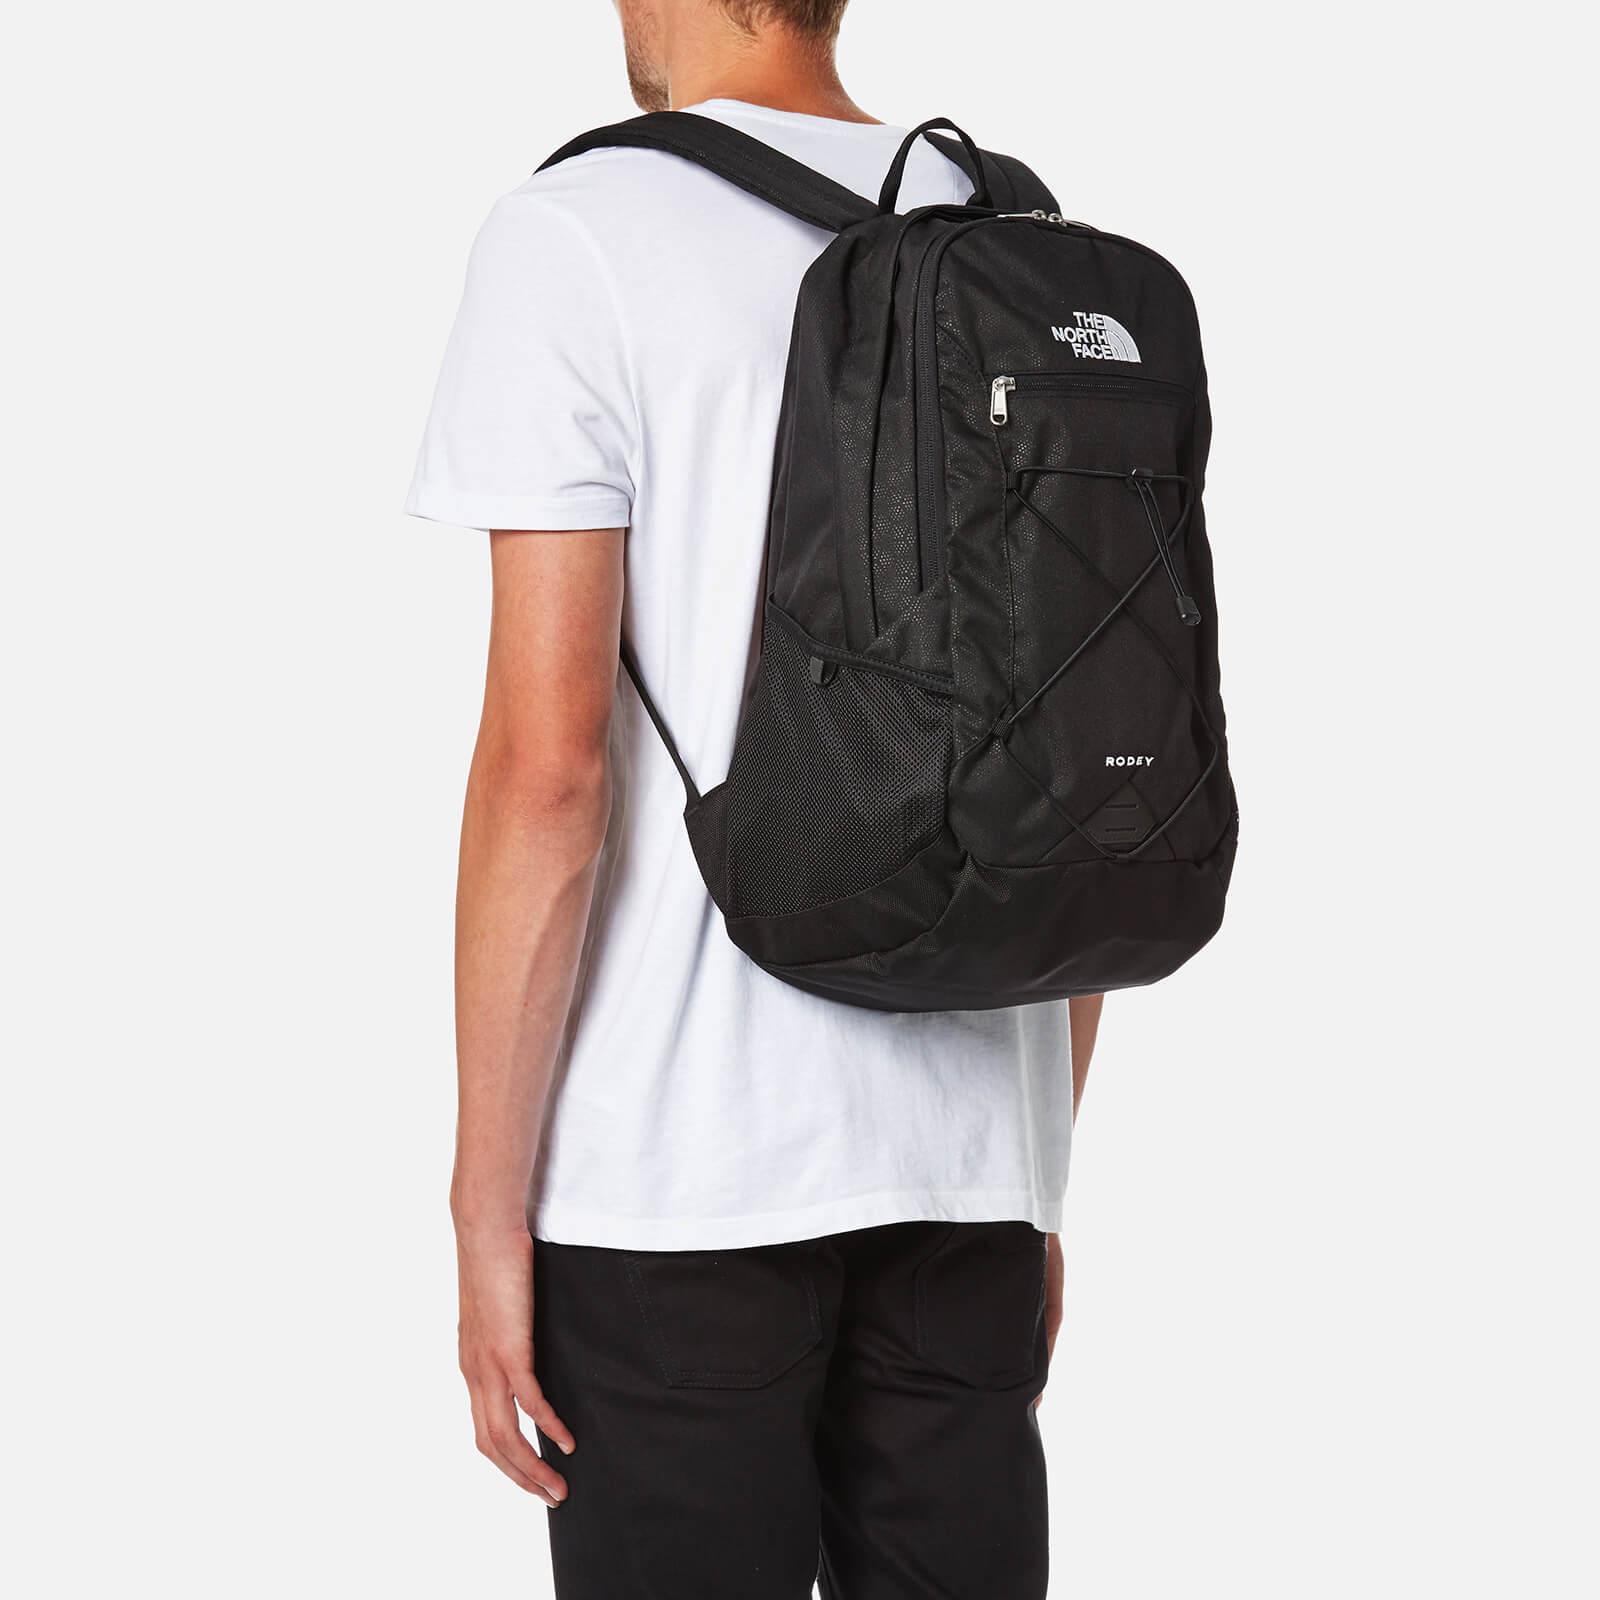 north face backpack rodey